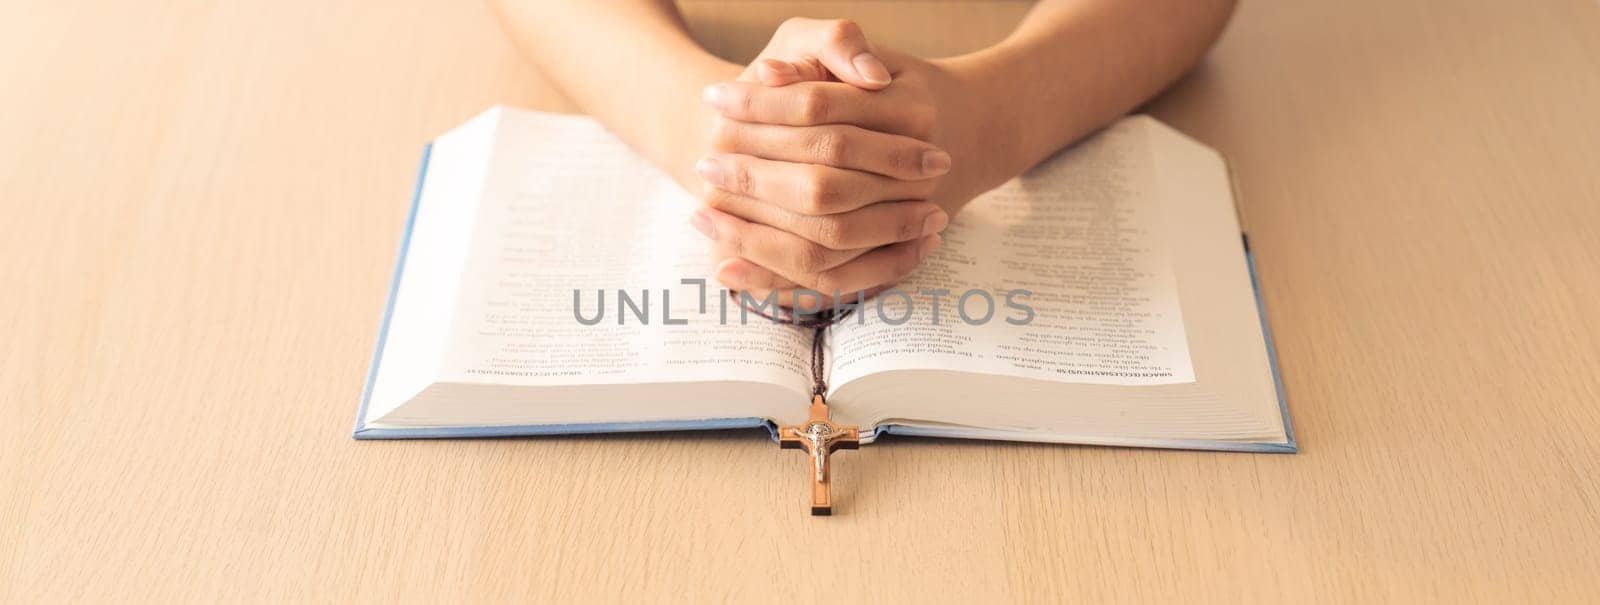 Cropped image of praying male hand holding cross on holy bible book at wooden table. Top view. Concept of hope, religion, faith, christianity and god blessing. Warm and brown background Burgeoning.